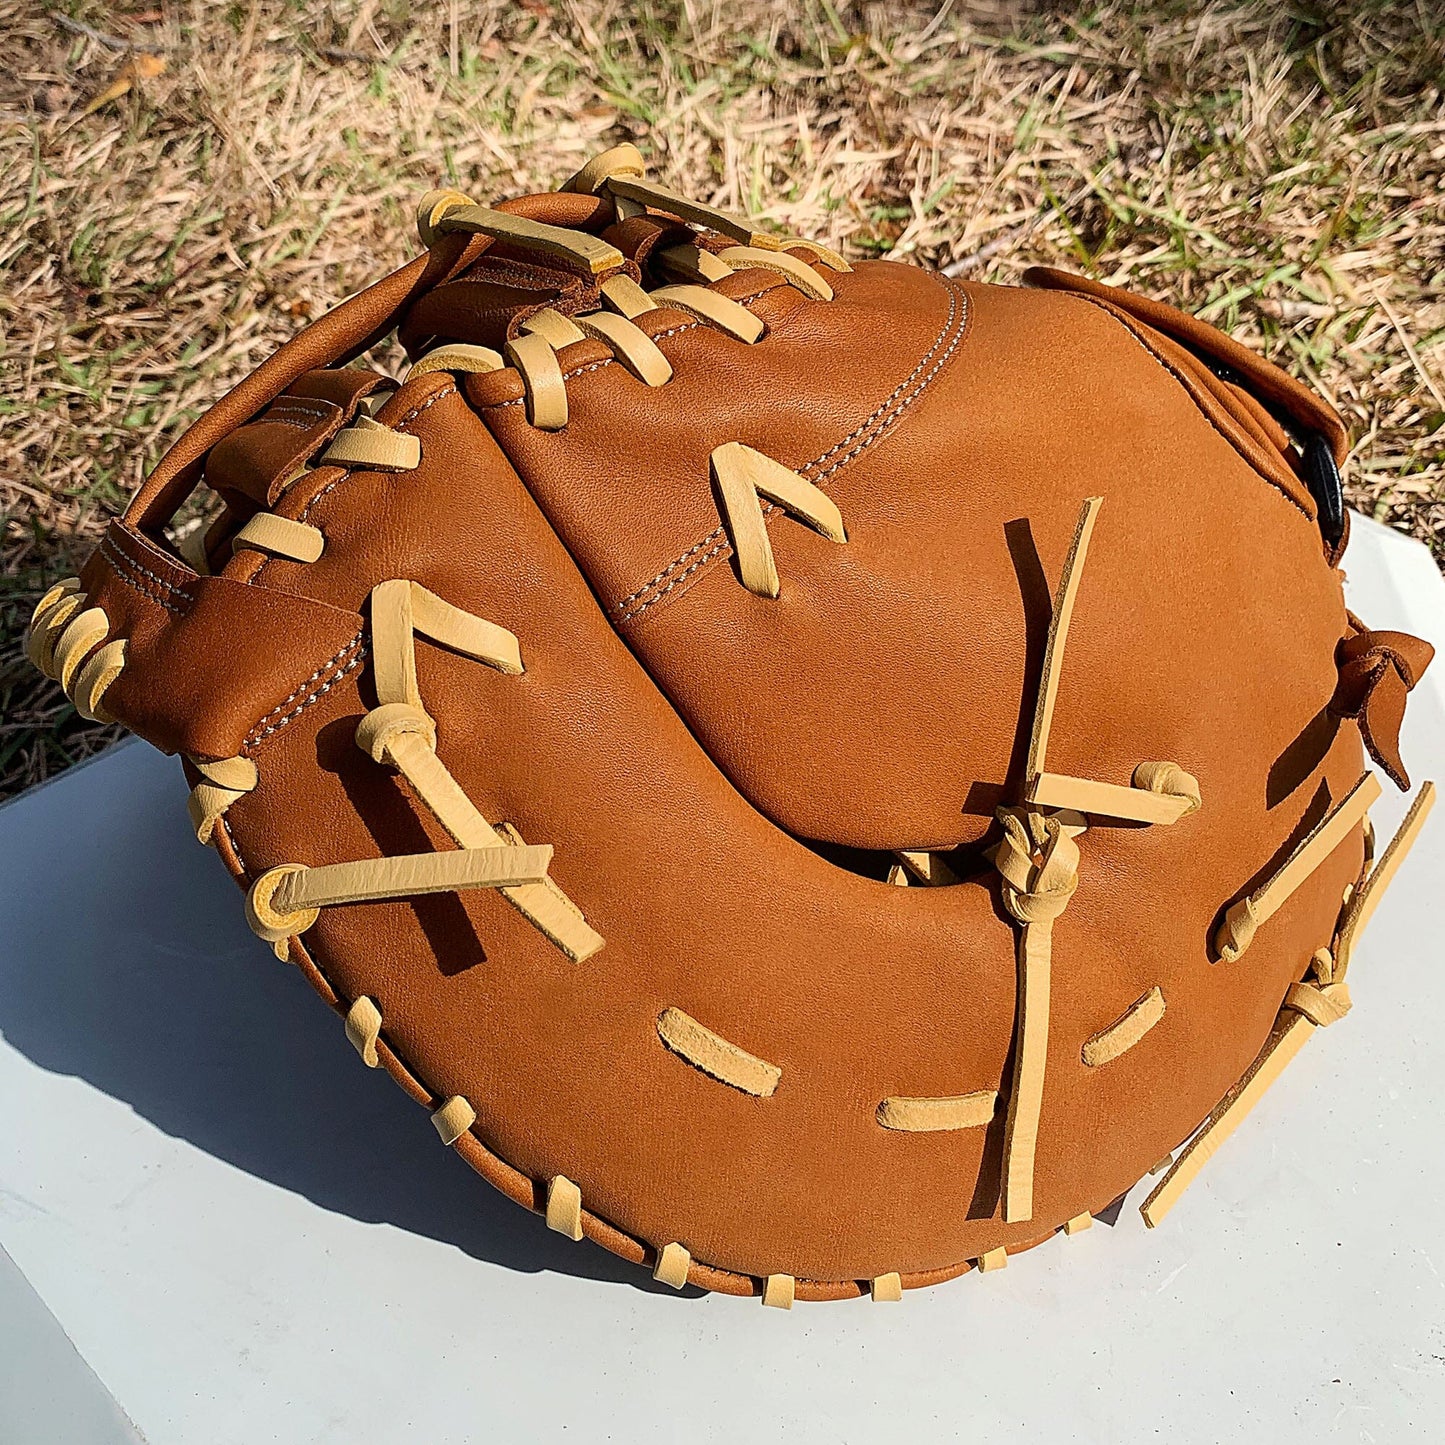 13" Softball First Base Mitt - Tan with Cream Laces